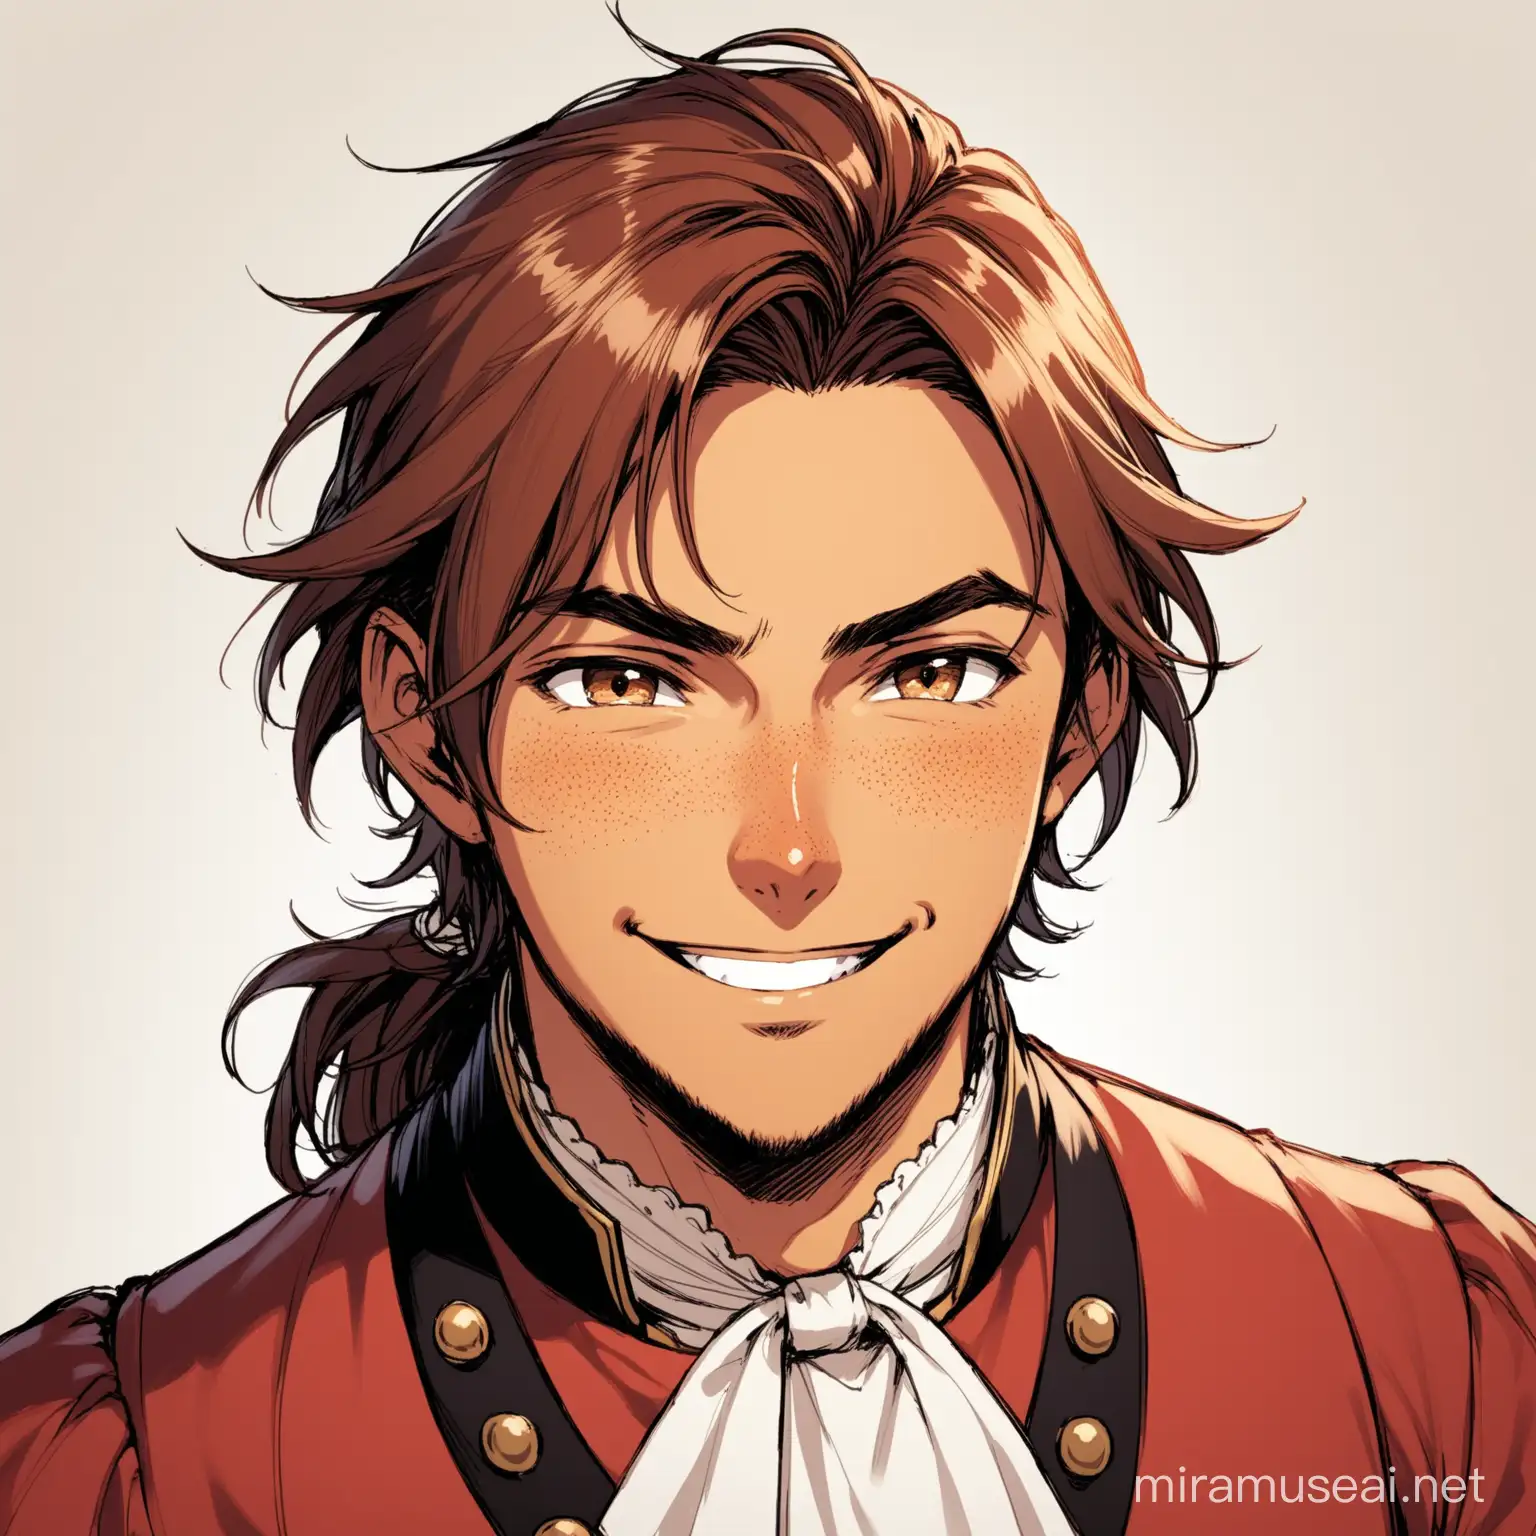 1guy, redish brown hair, messy hair, small low ponytail, slightly tan, faint freckles, Mischievous smirk, 19th century nobleman clothing, white background 